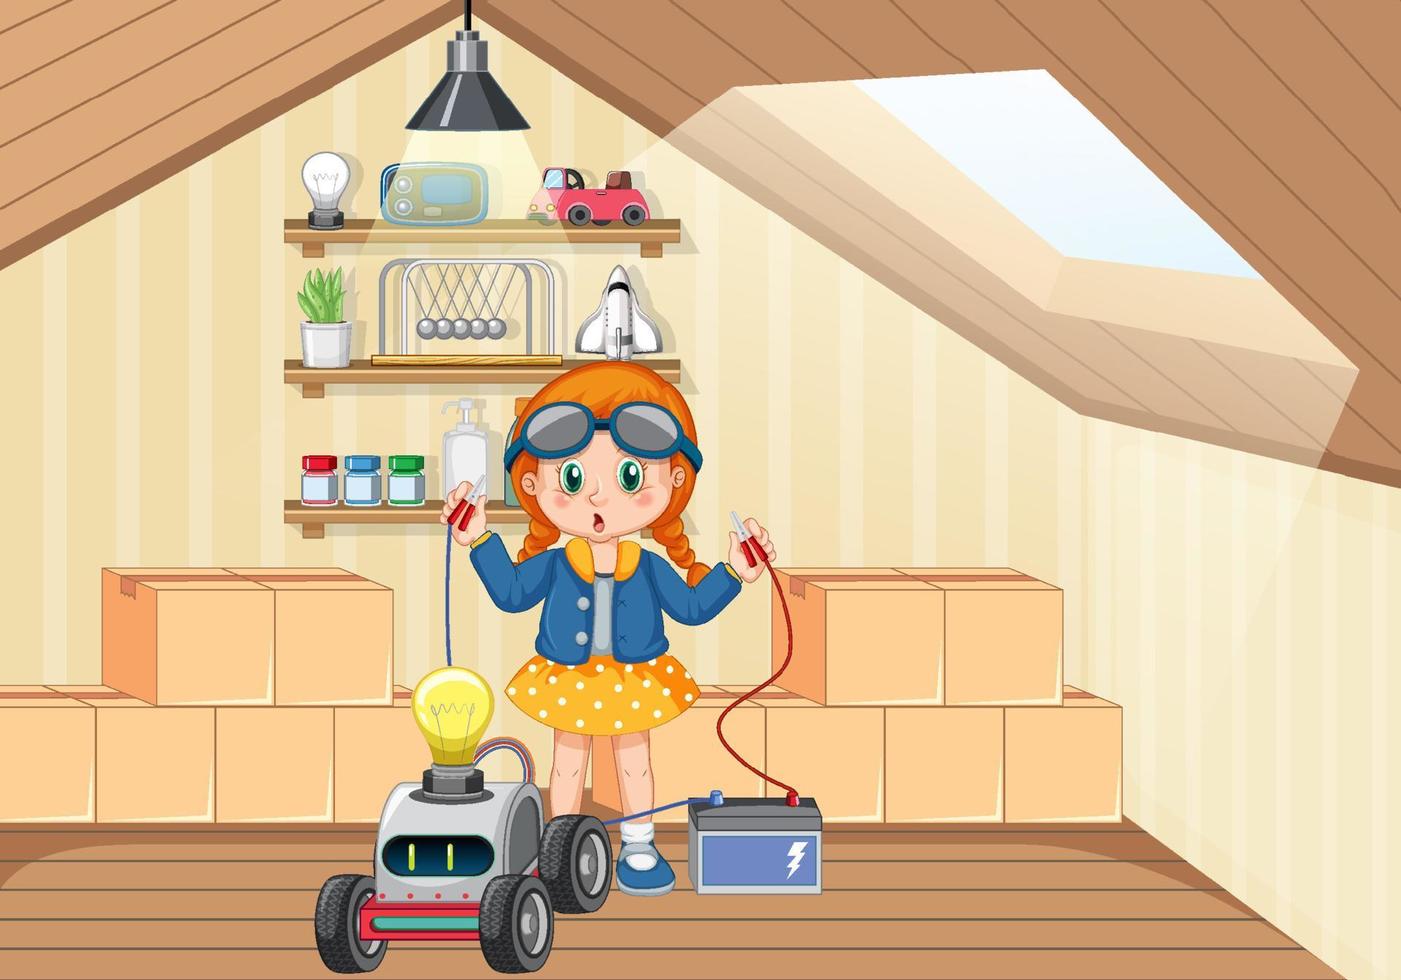 A girl repairing a robot together in the room scene vector